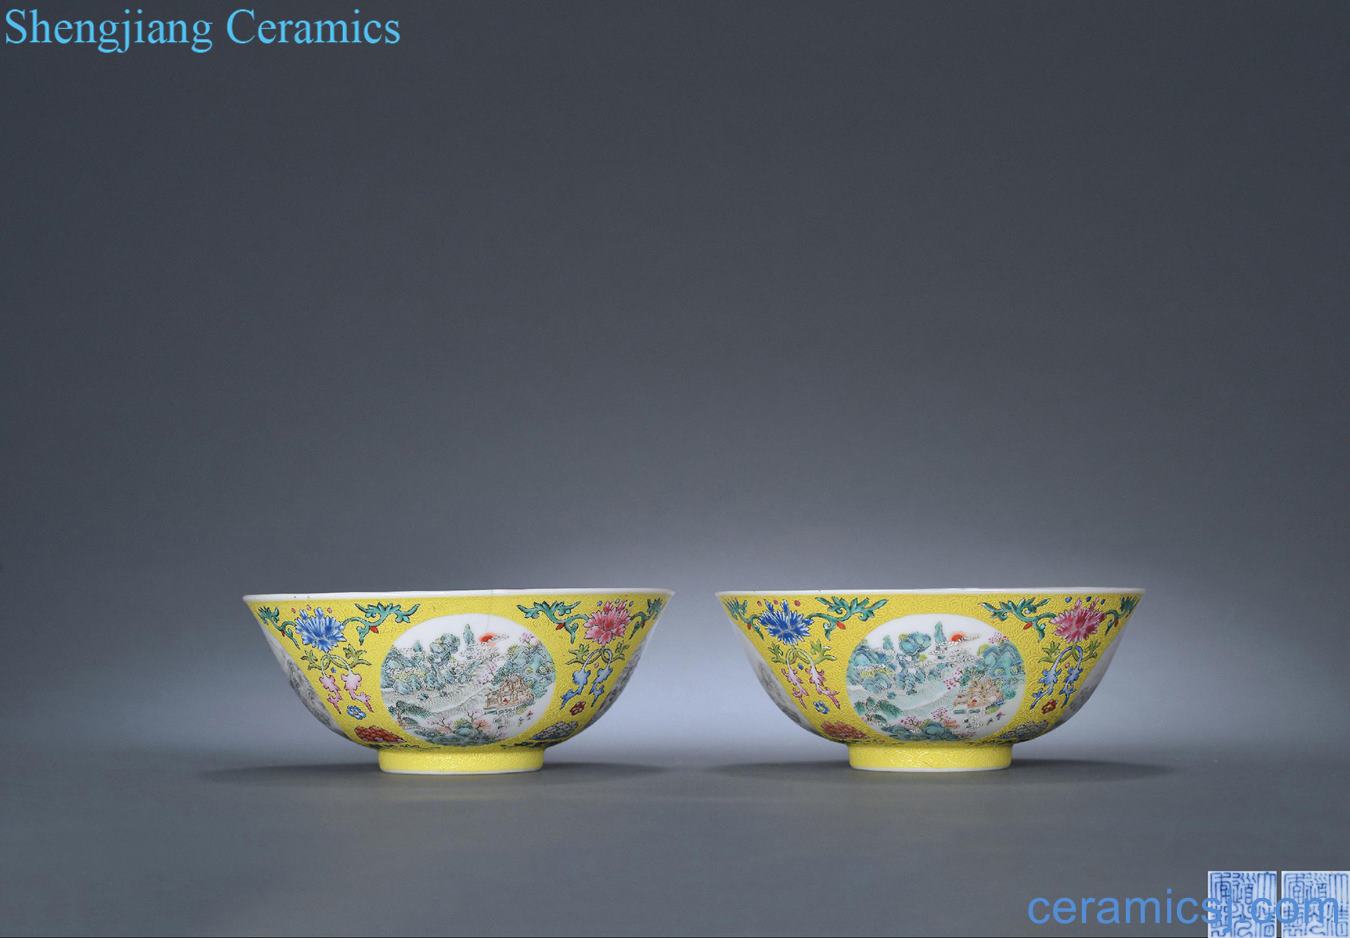 Qing daoguang (a) to pastel yellow medallion landscape figure bowl